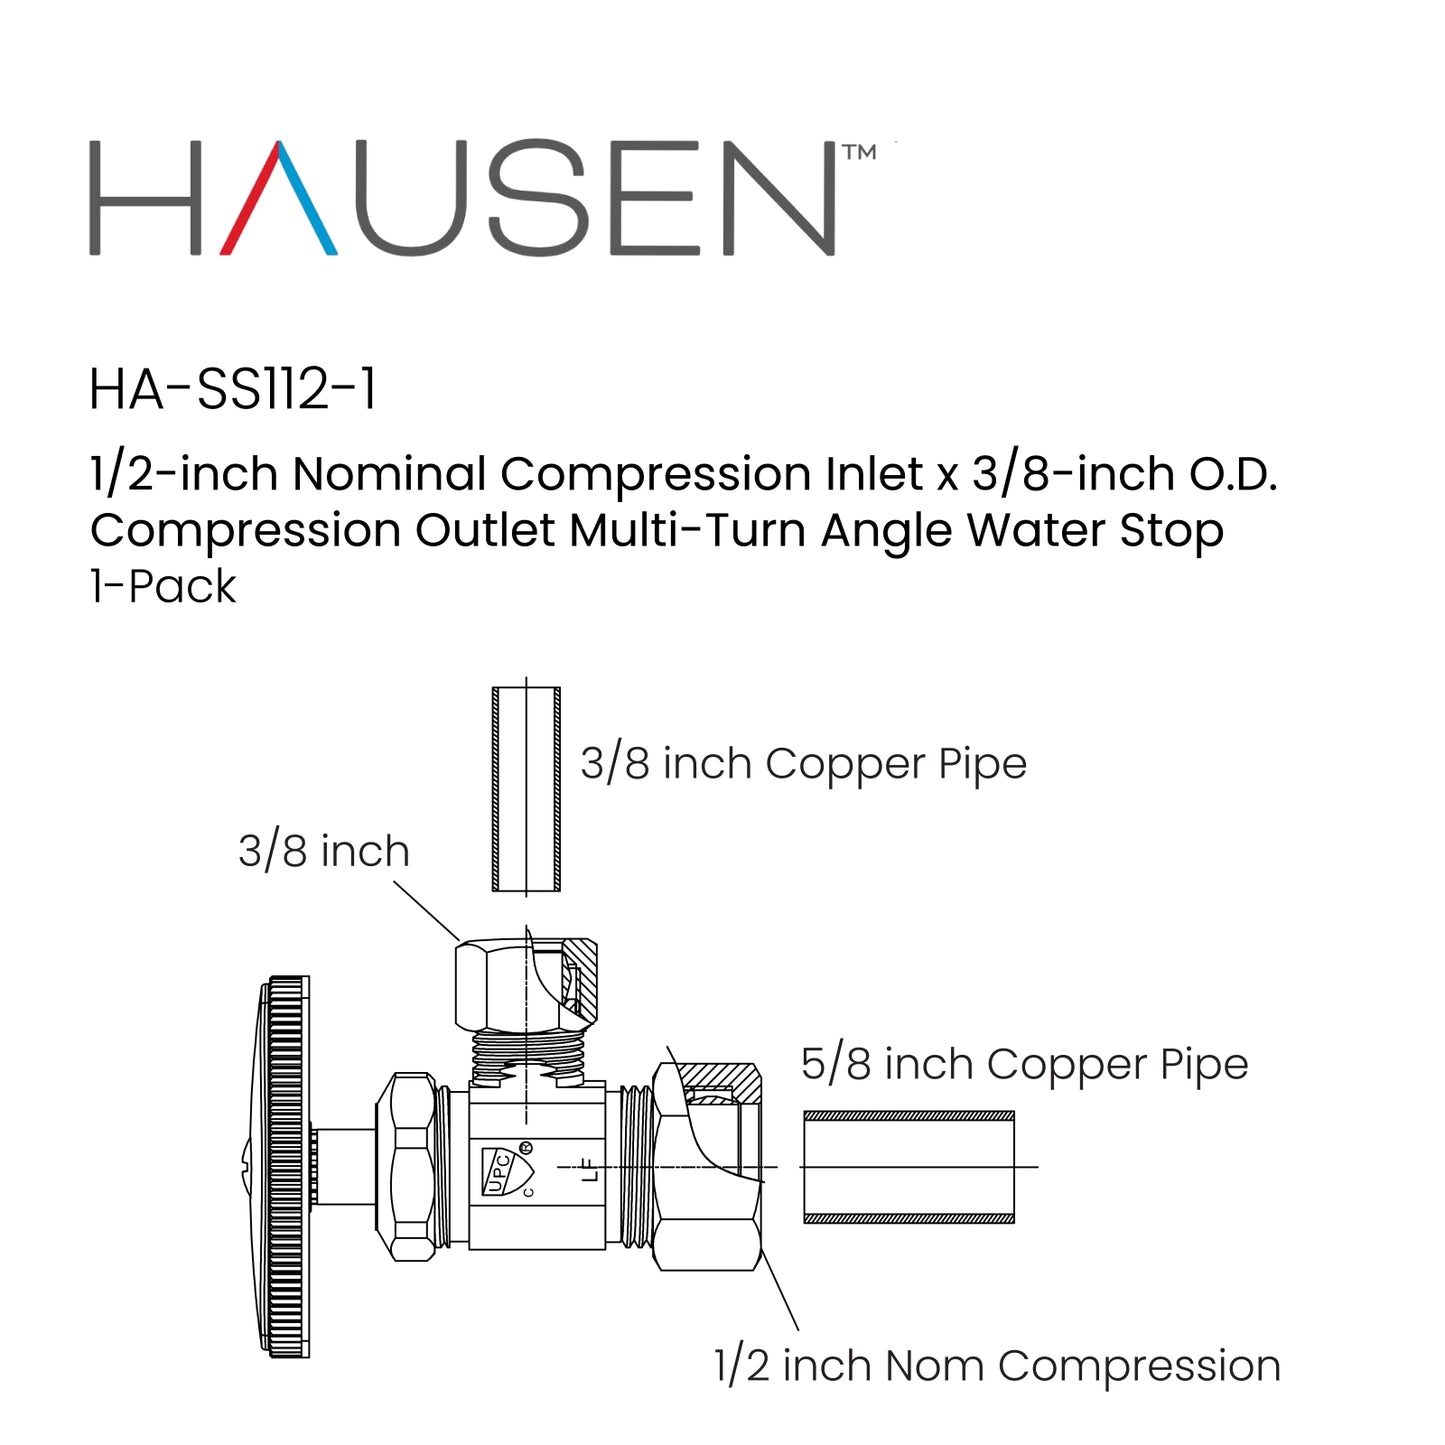 Hausen 1/2-inch Nominal Compression Inlet x 3/8-inch O.D. Compression Outlet Multi-Turn Angle Water Stop, 1-Pack